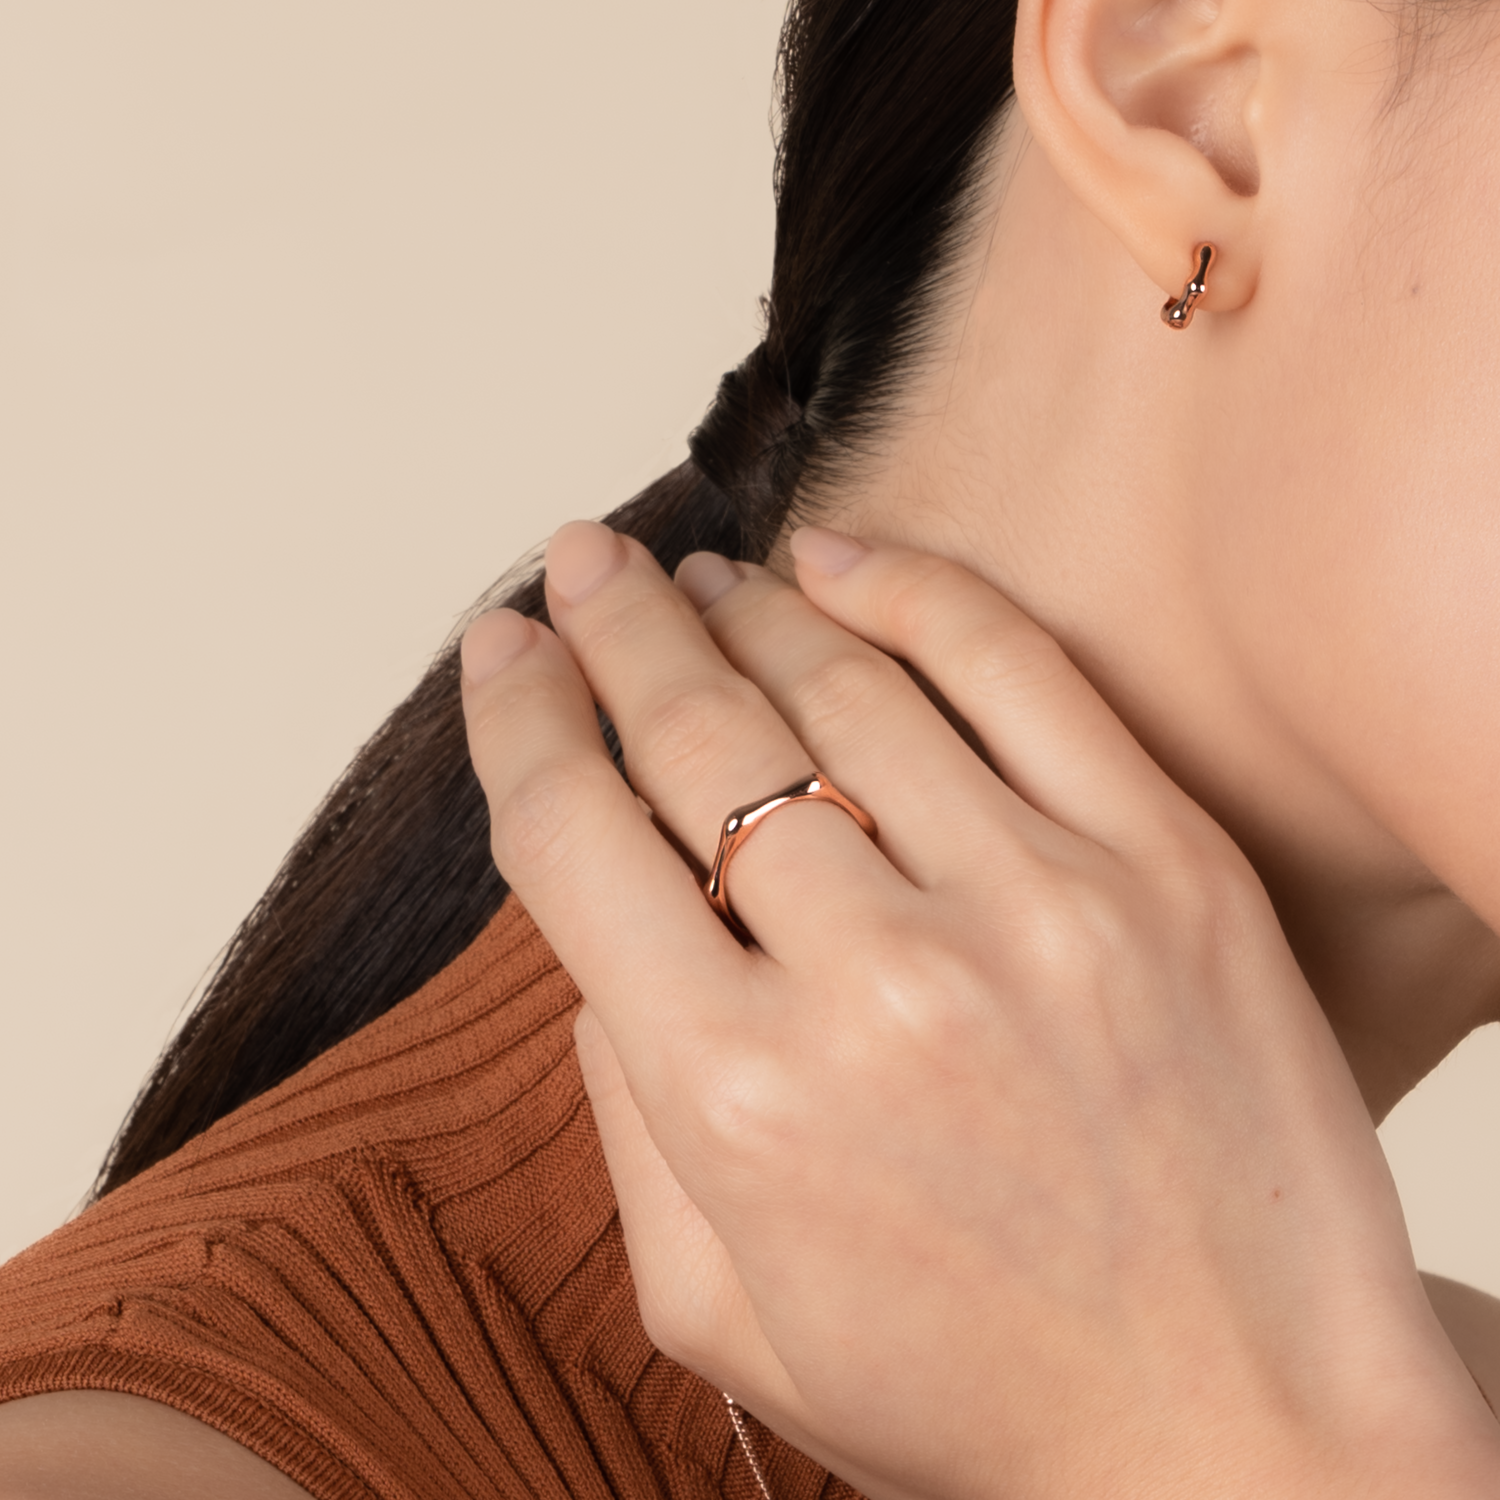 Model is wearing minimalist and sleek ring in rose gold.